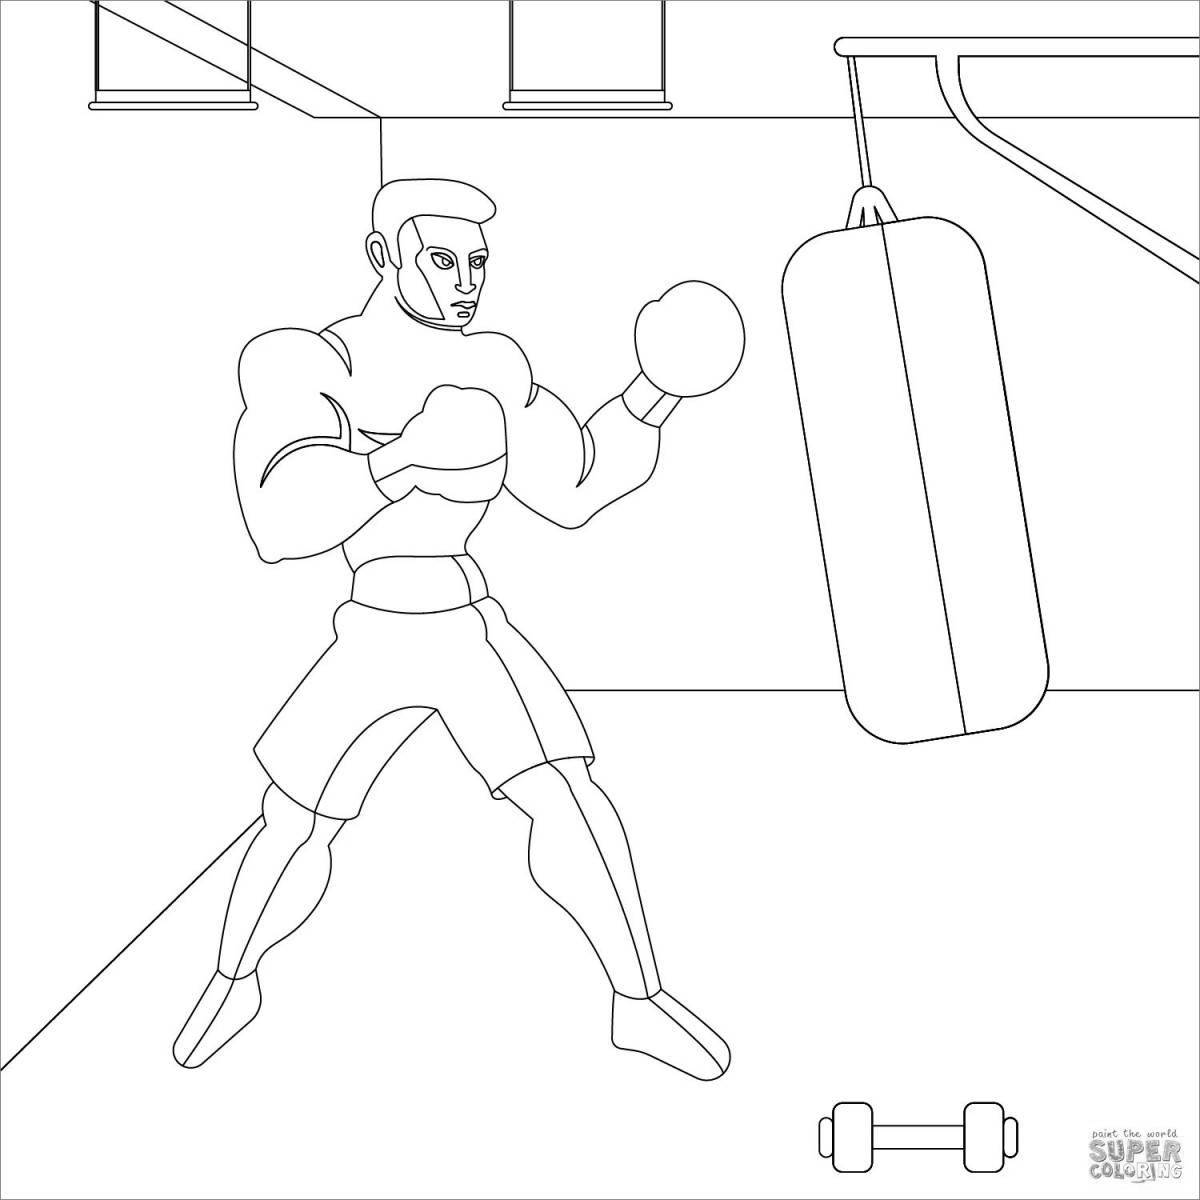 Fun boxing and boo coloring for kids